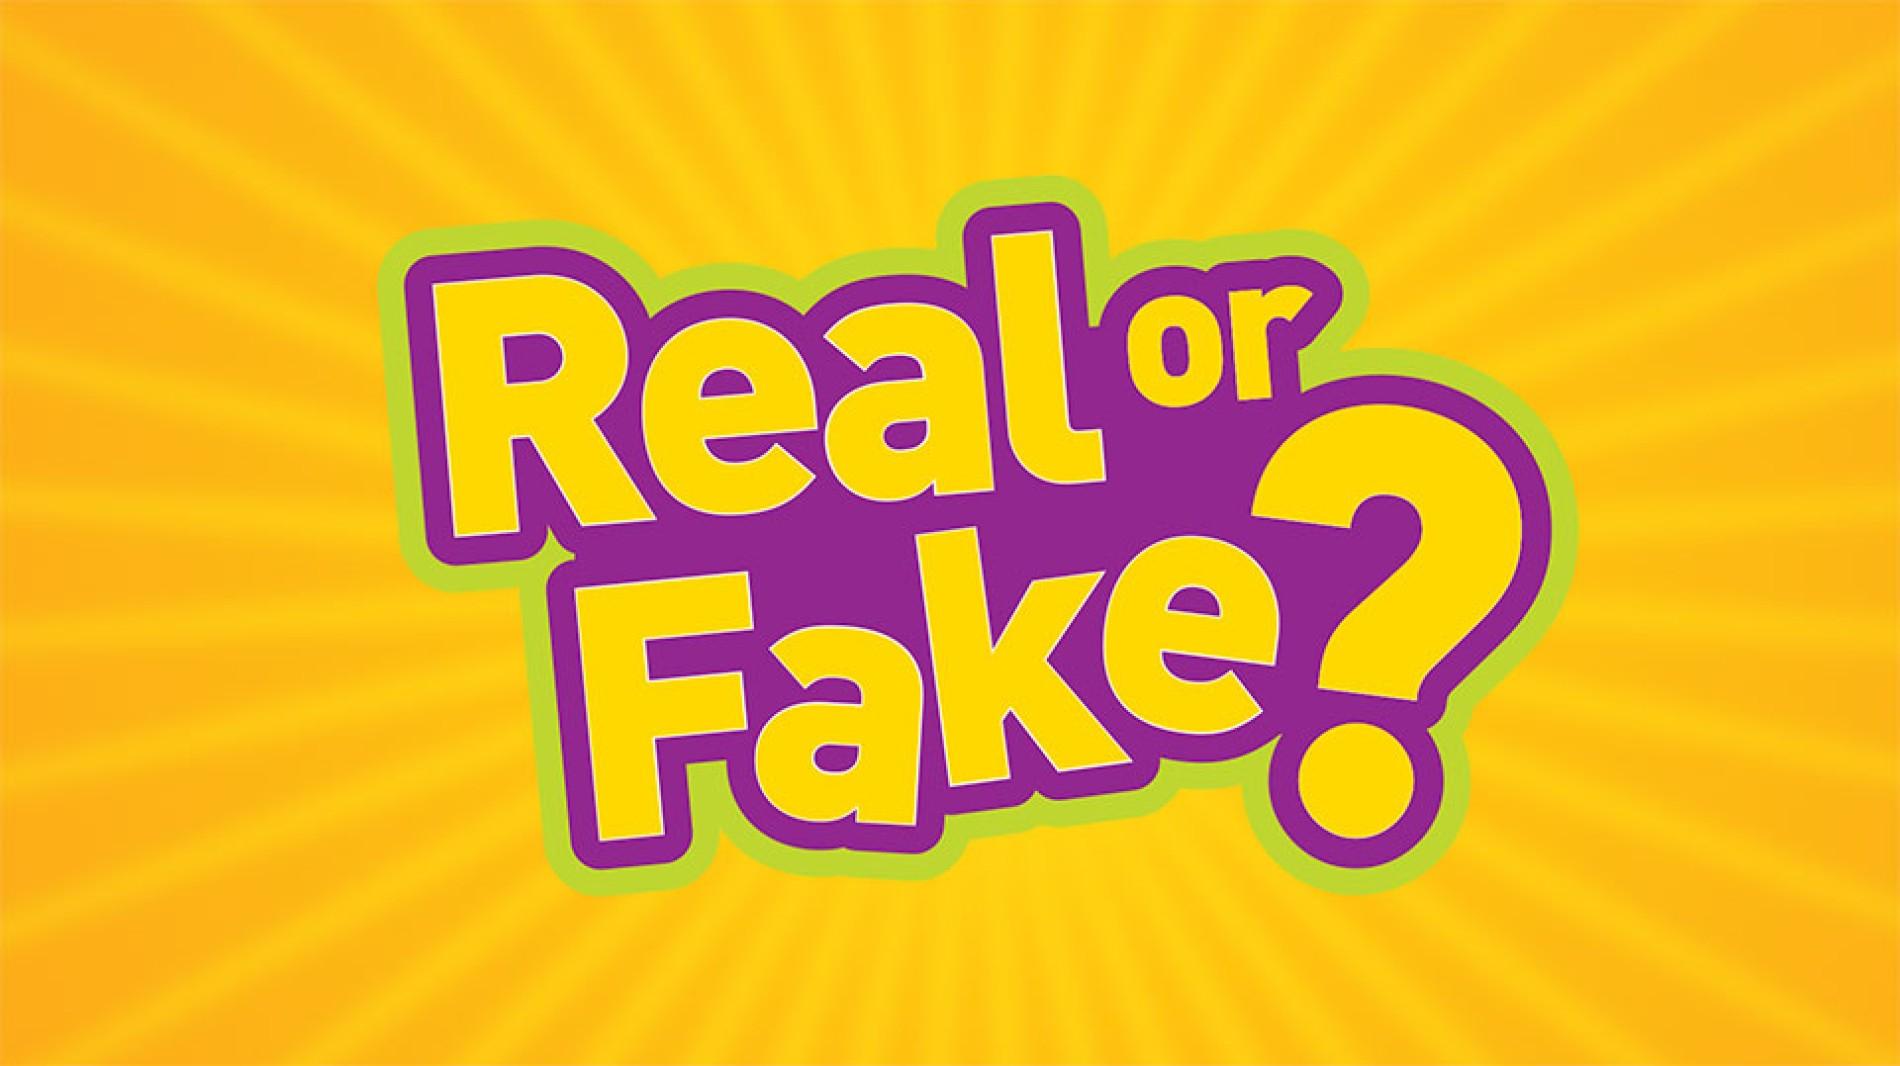 The research utilises data collected from Real or Fake Text?, an original online training game. (Illustrative image).